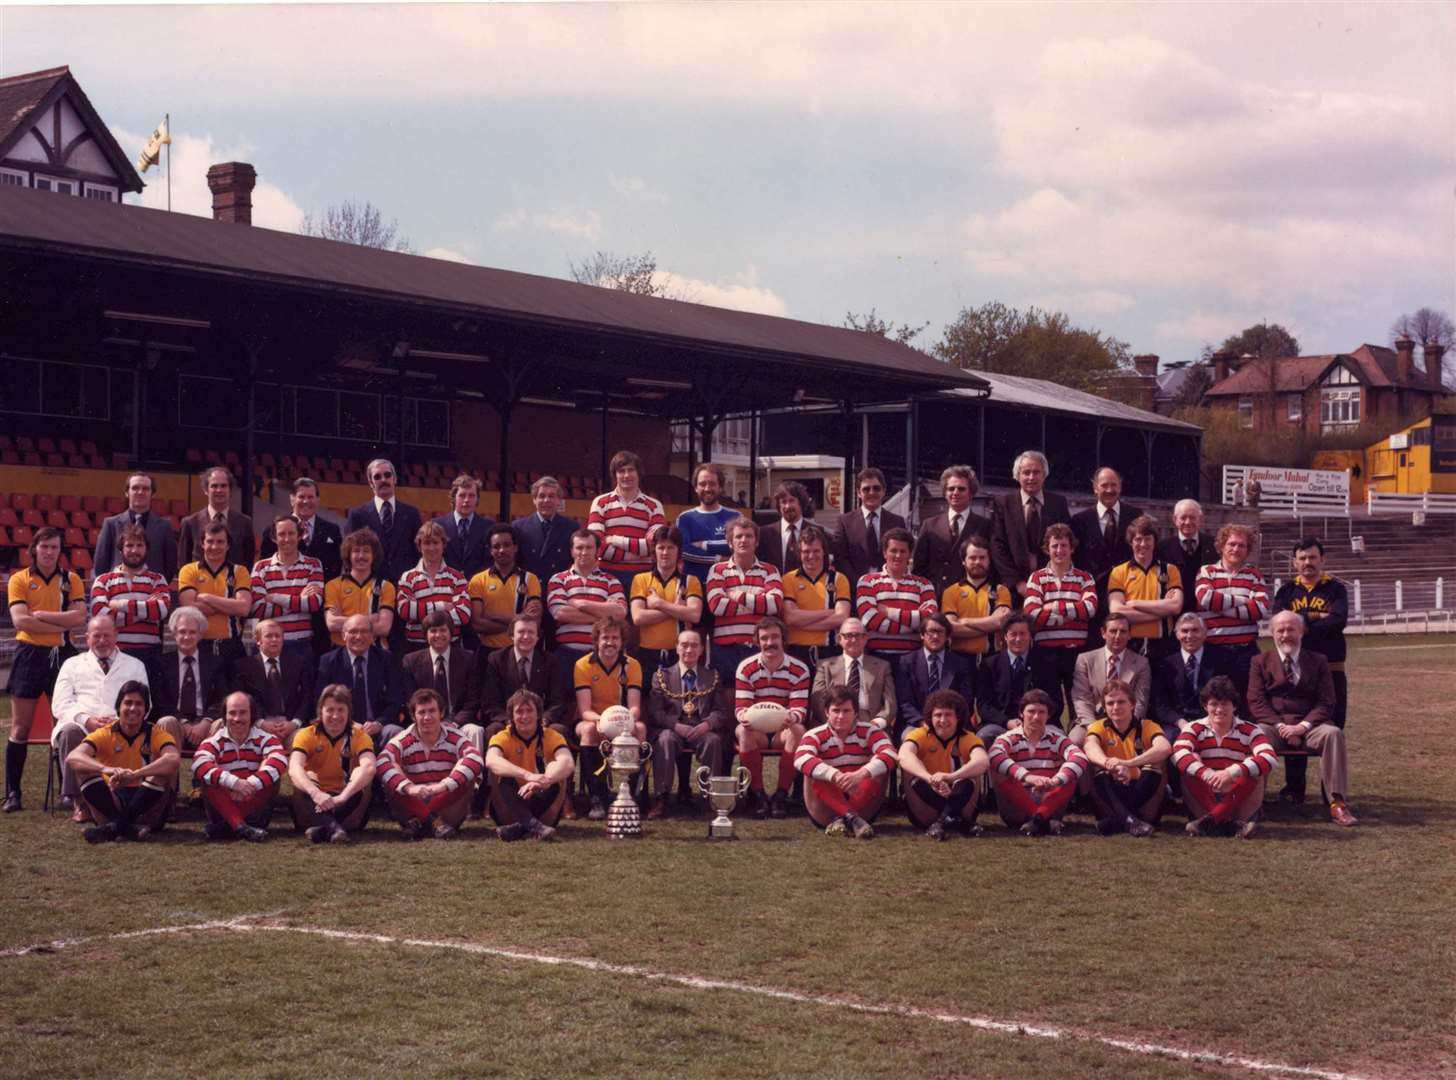 Maidstone RFC & Maidstone FC in the late 1970s/early 1980s. Submitted by Robert Beney